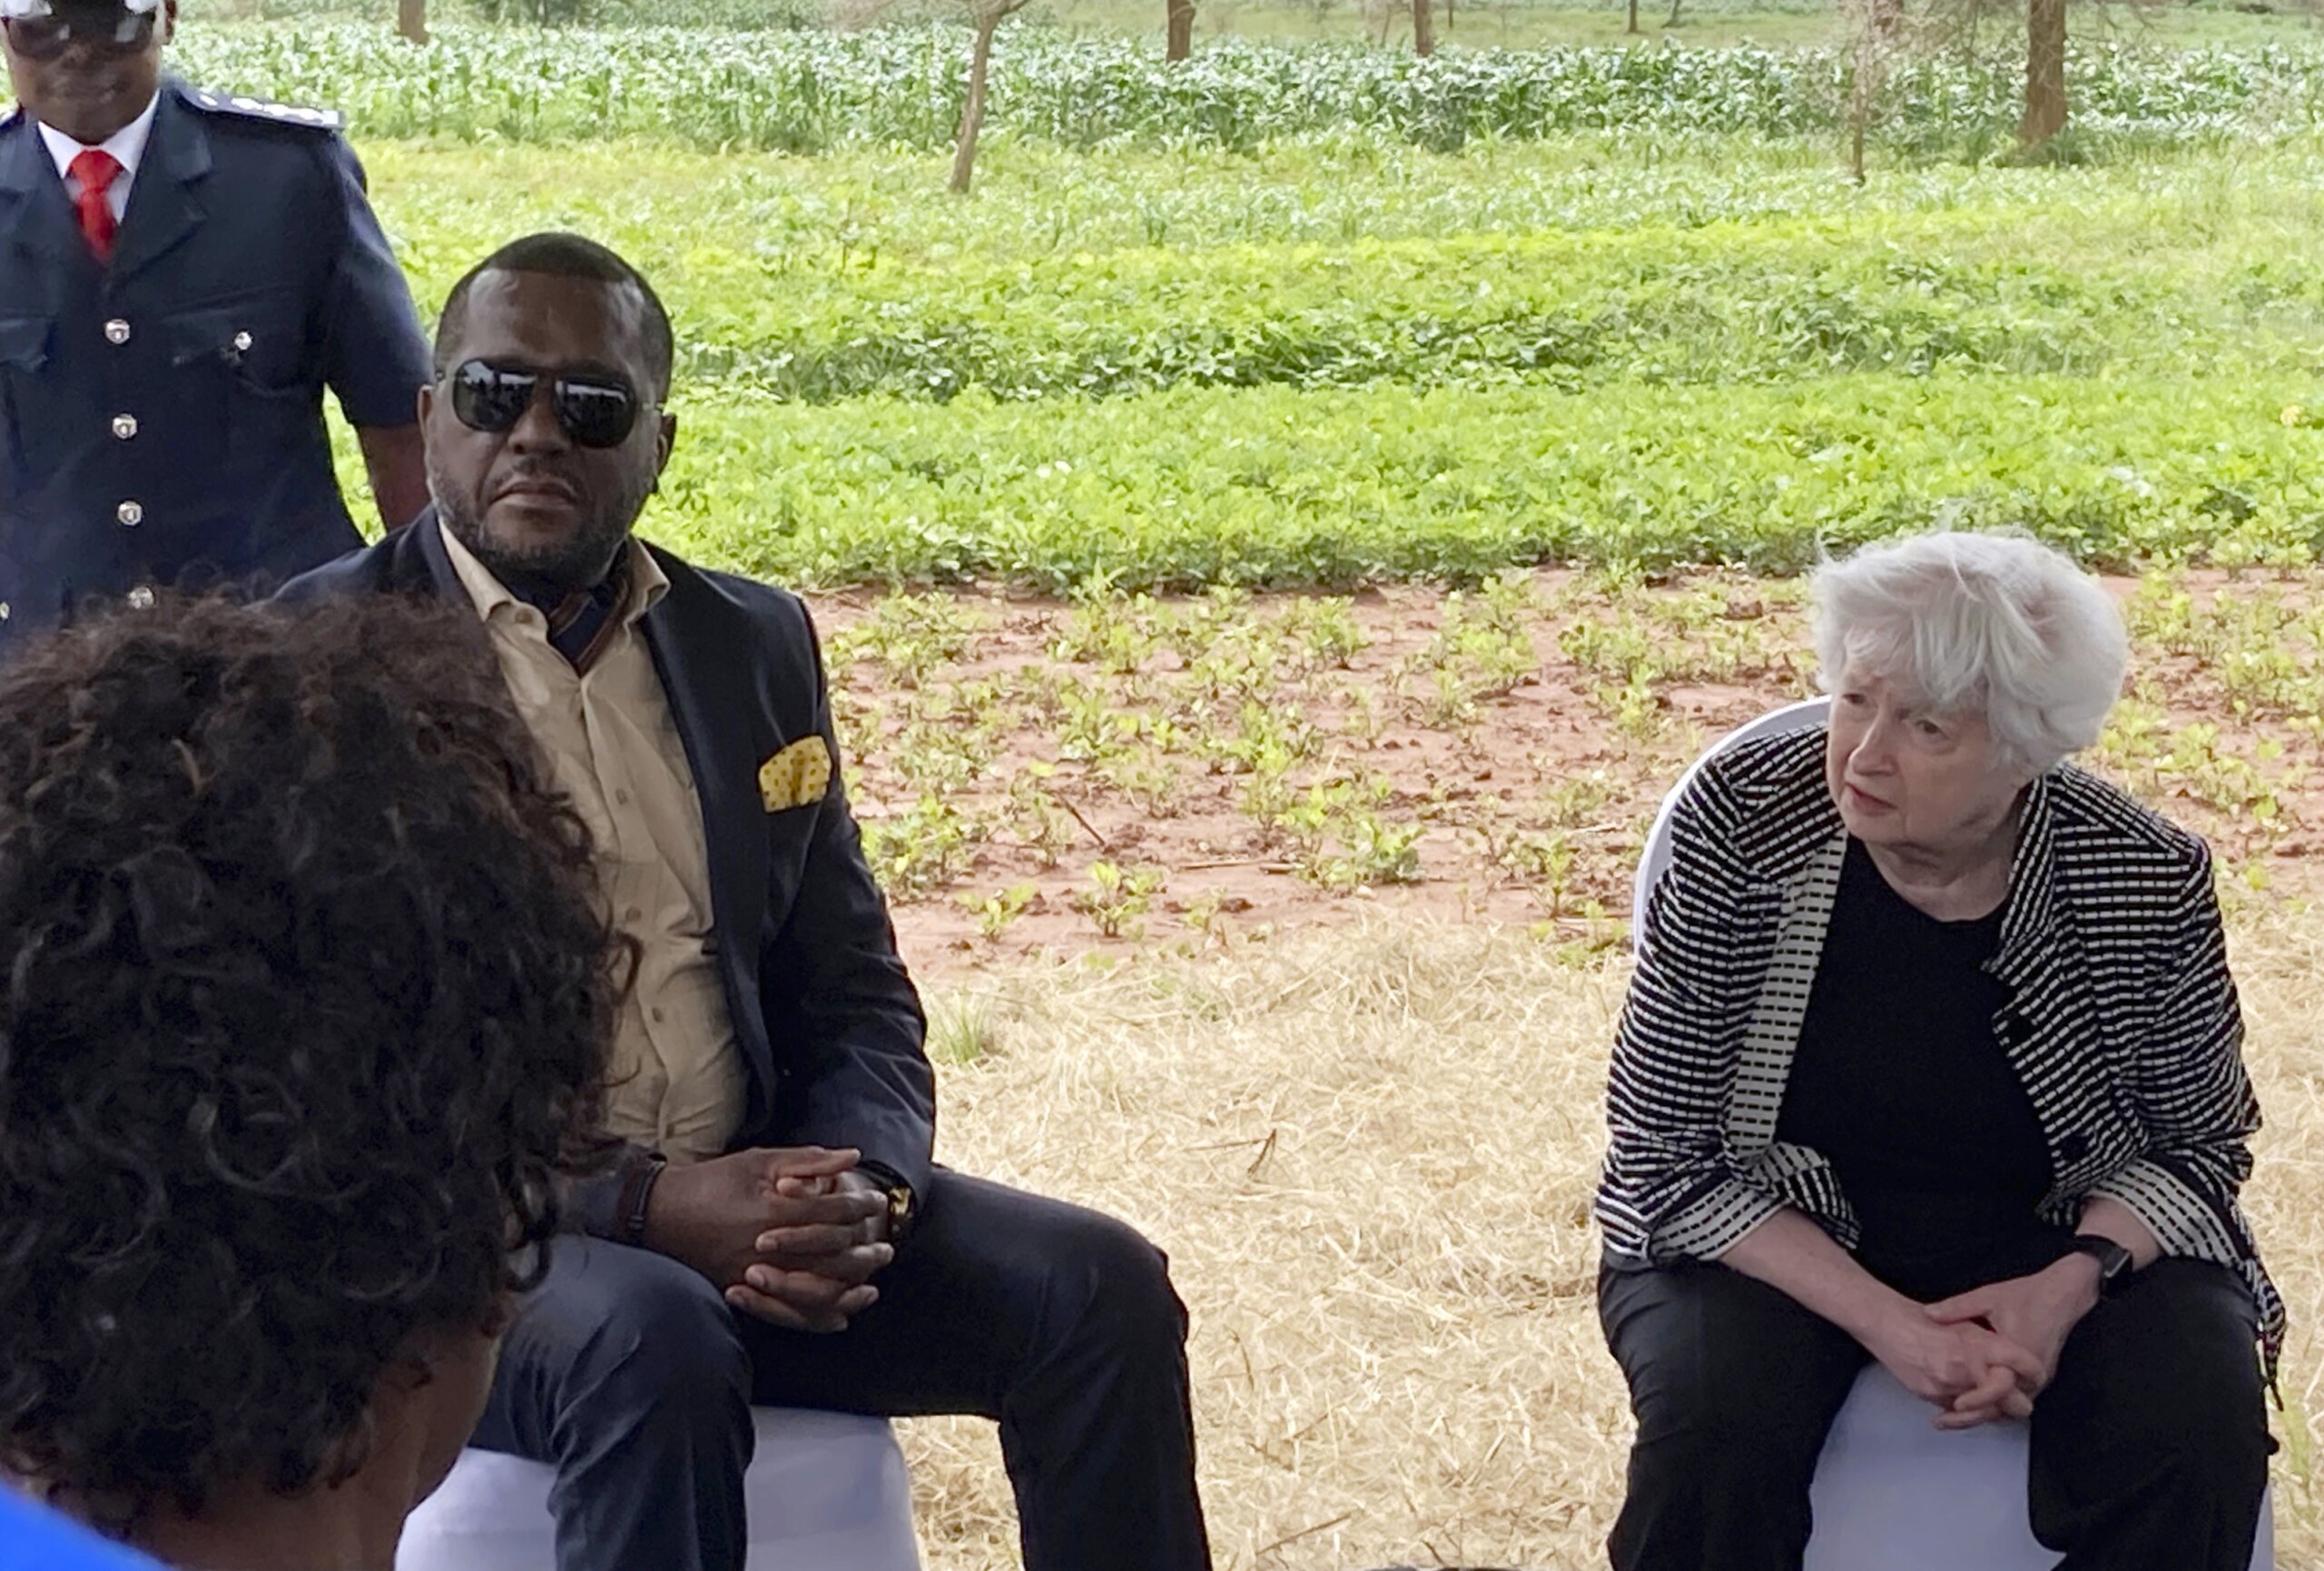 Yellen visits Zambian farm to showcase Africa’s ag potential